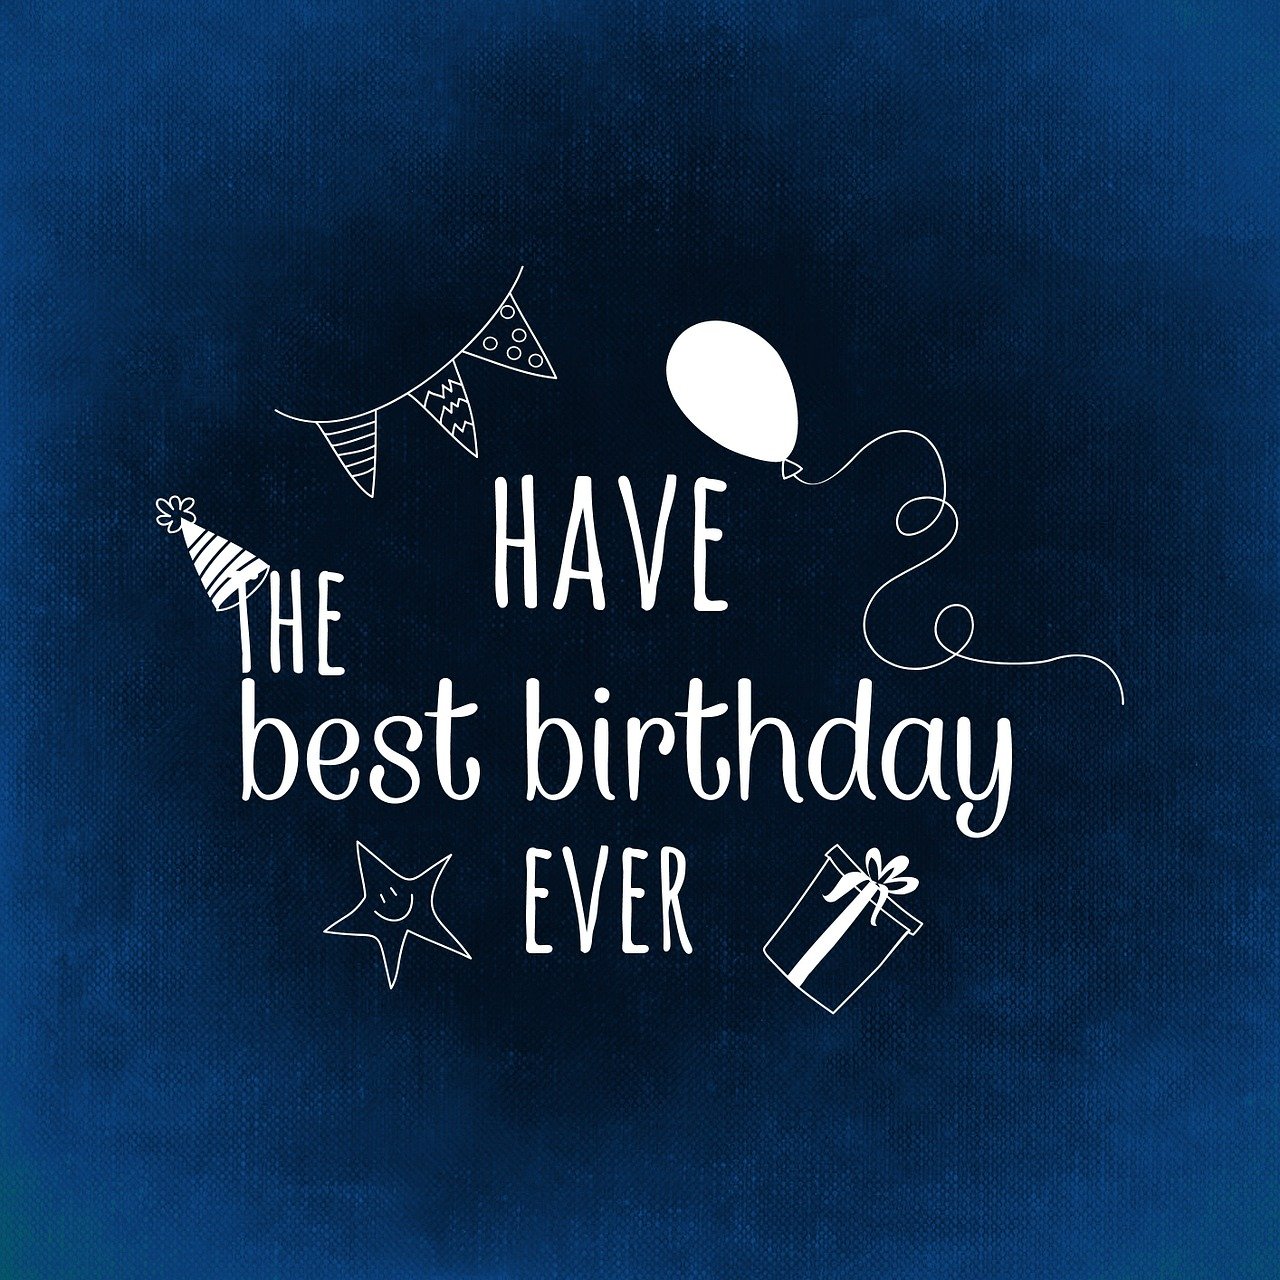 a birthday card with the words have the best birthday ever, by Helen Stevenson, pixabay, decorative dark blue clothing, white font on black canvas, high quality details, chalkboard